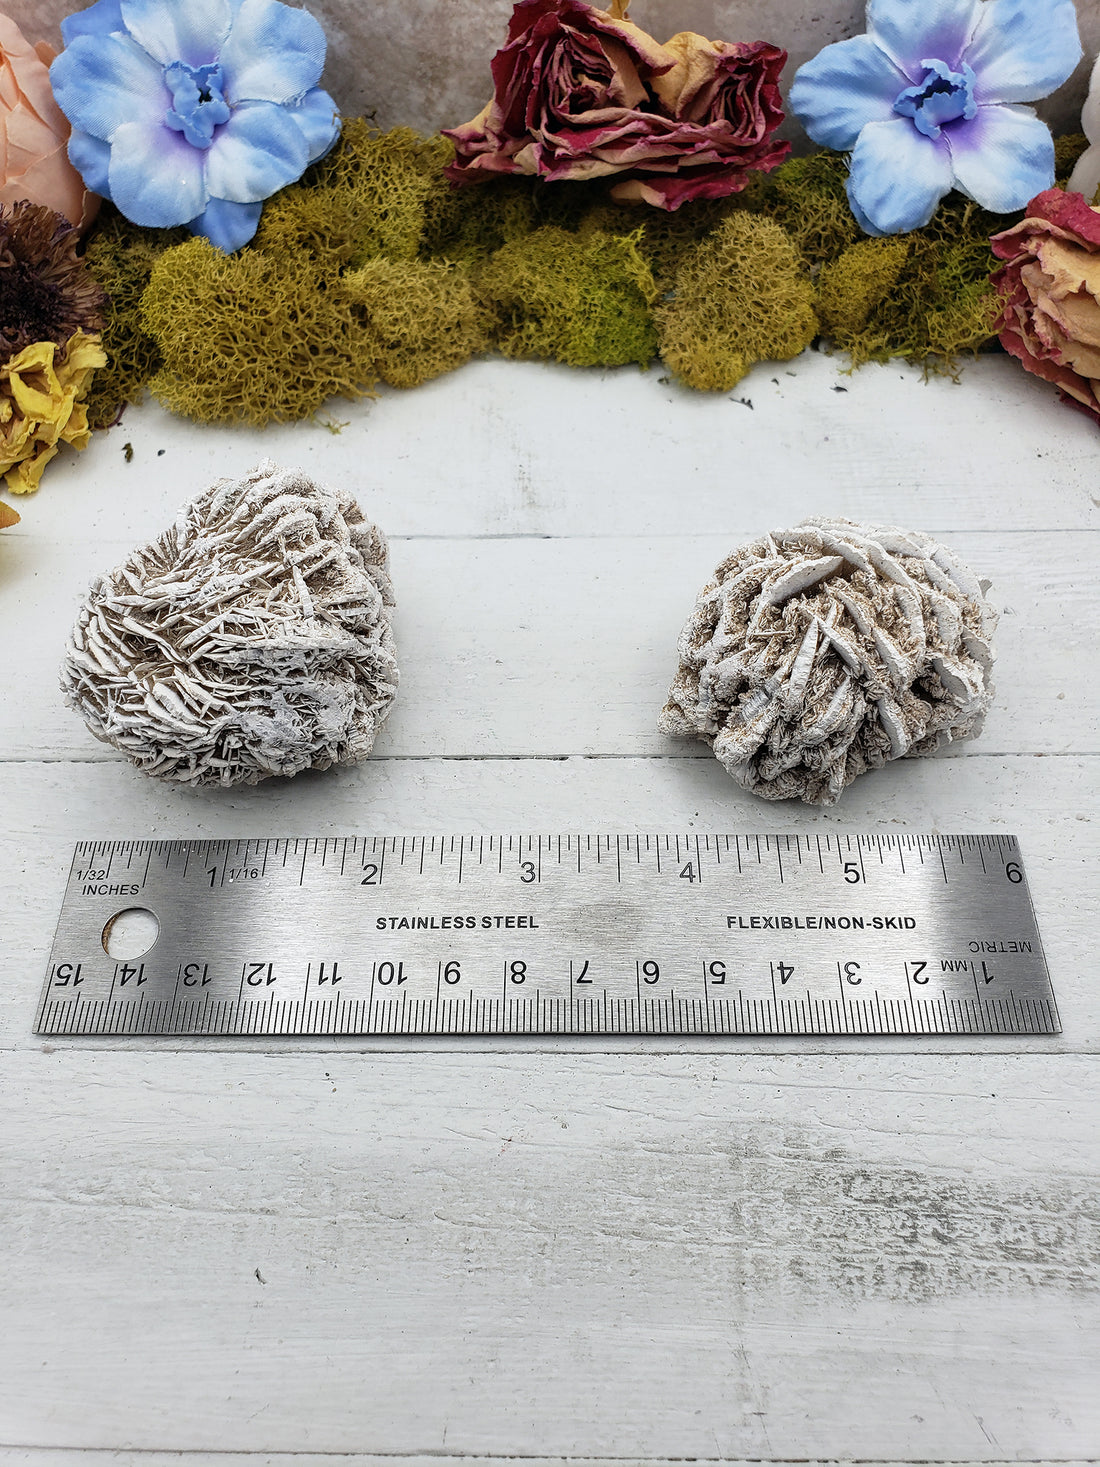 ruler comparing size of two selenite desert rose stone pieces